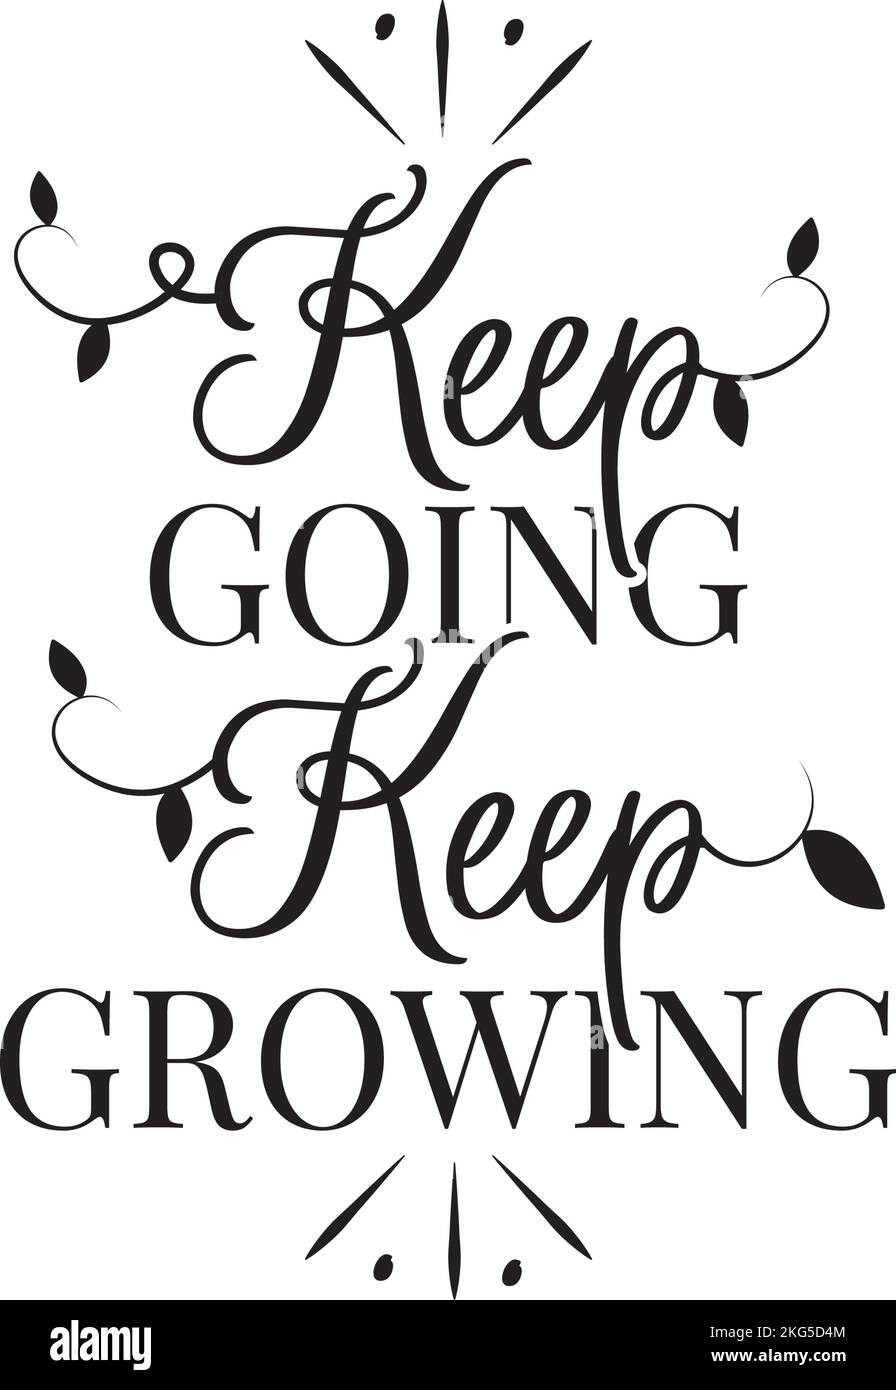 Keep Going Keep Growing, vector. Motivational inspirational life quote. Positive thinking, affirmation. Wording design isolated on white background Stock Vector